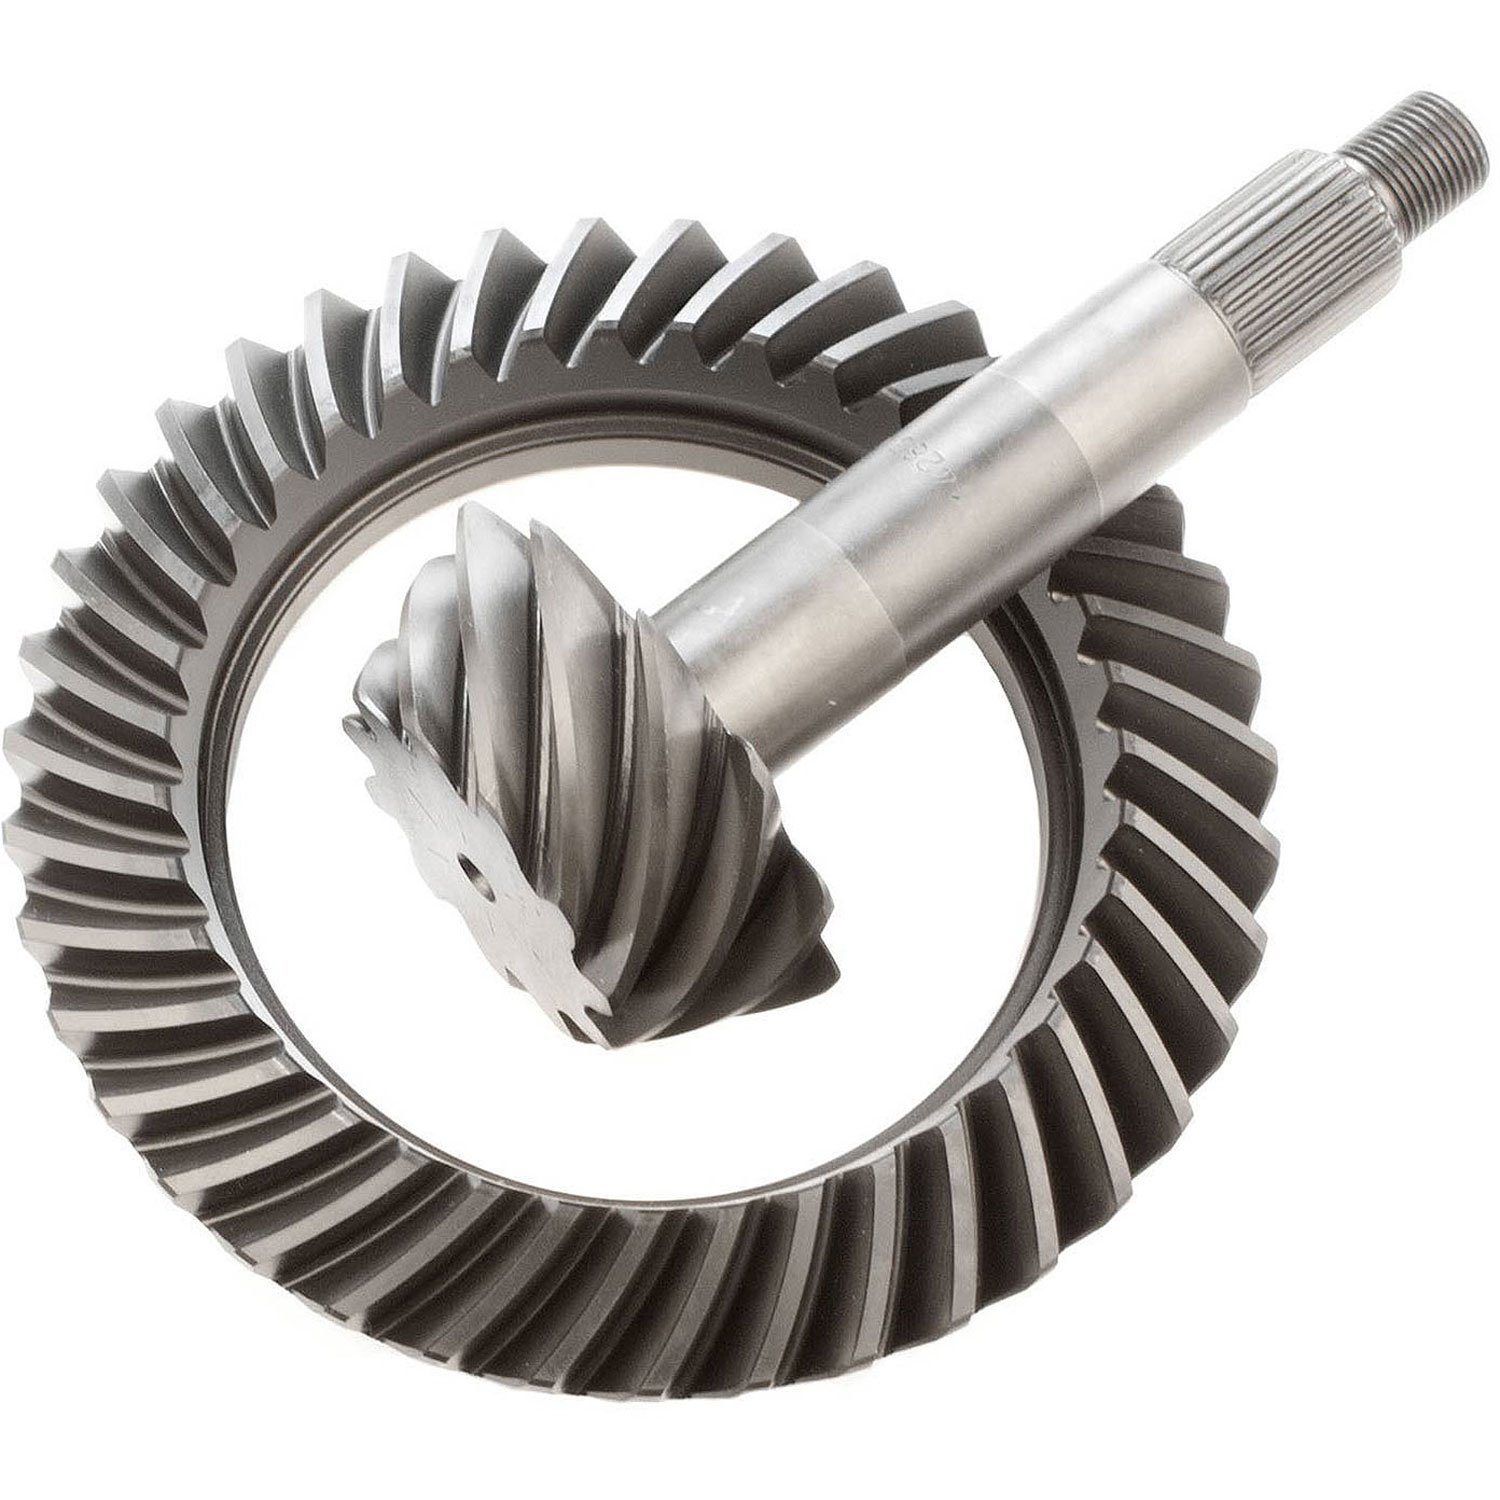 Ring & Pinion Gears Chrysler 8.75" (Early 741 Housing)